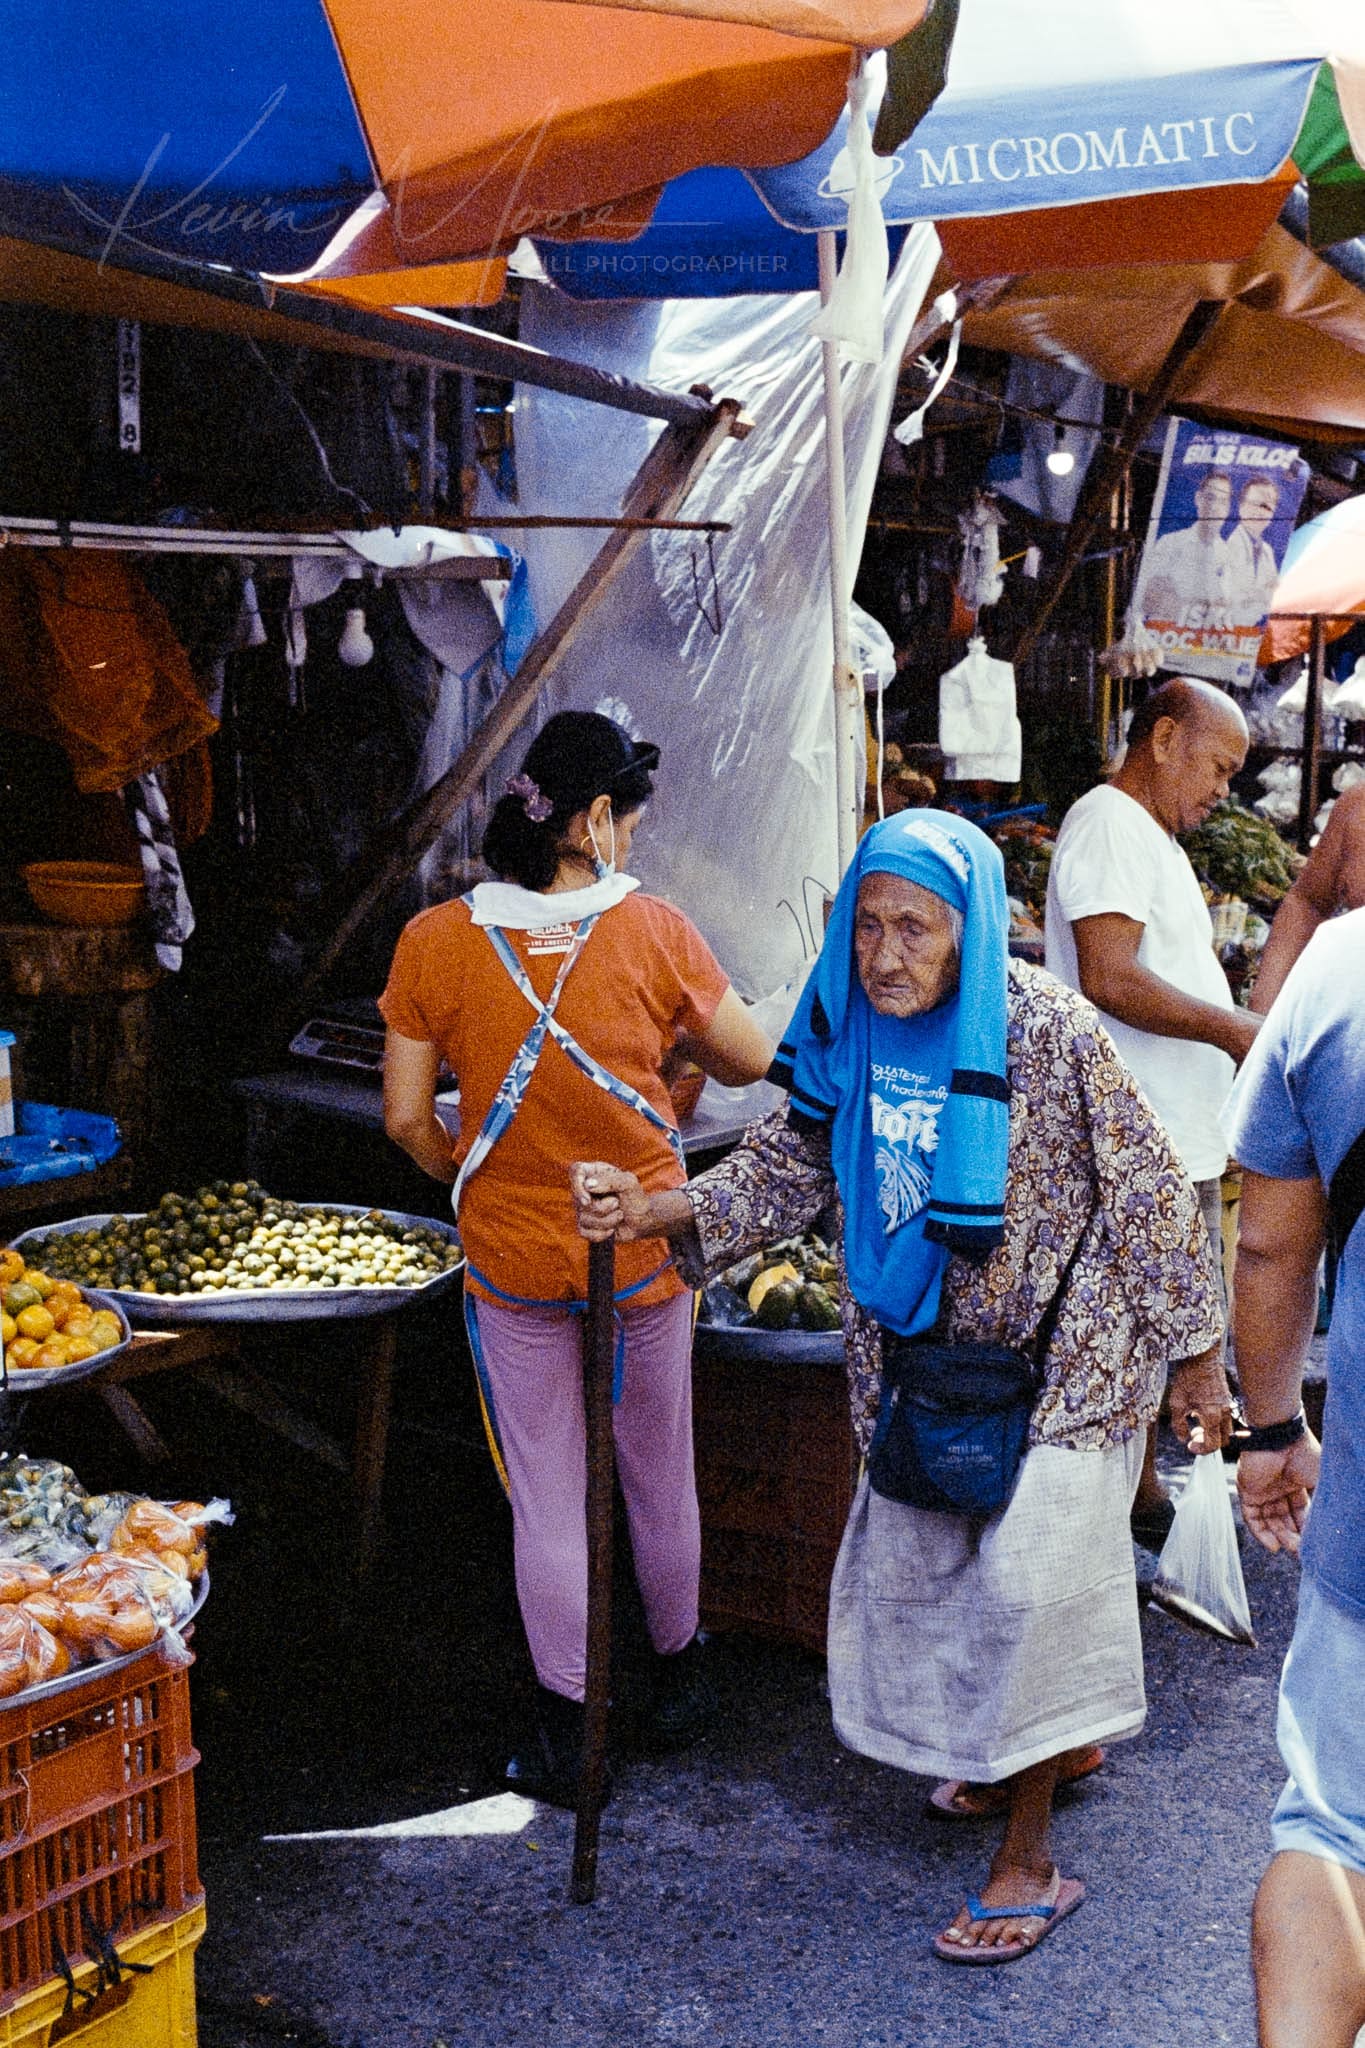 Elderly woman in traditional dress shopping at lively, diverse food market.